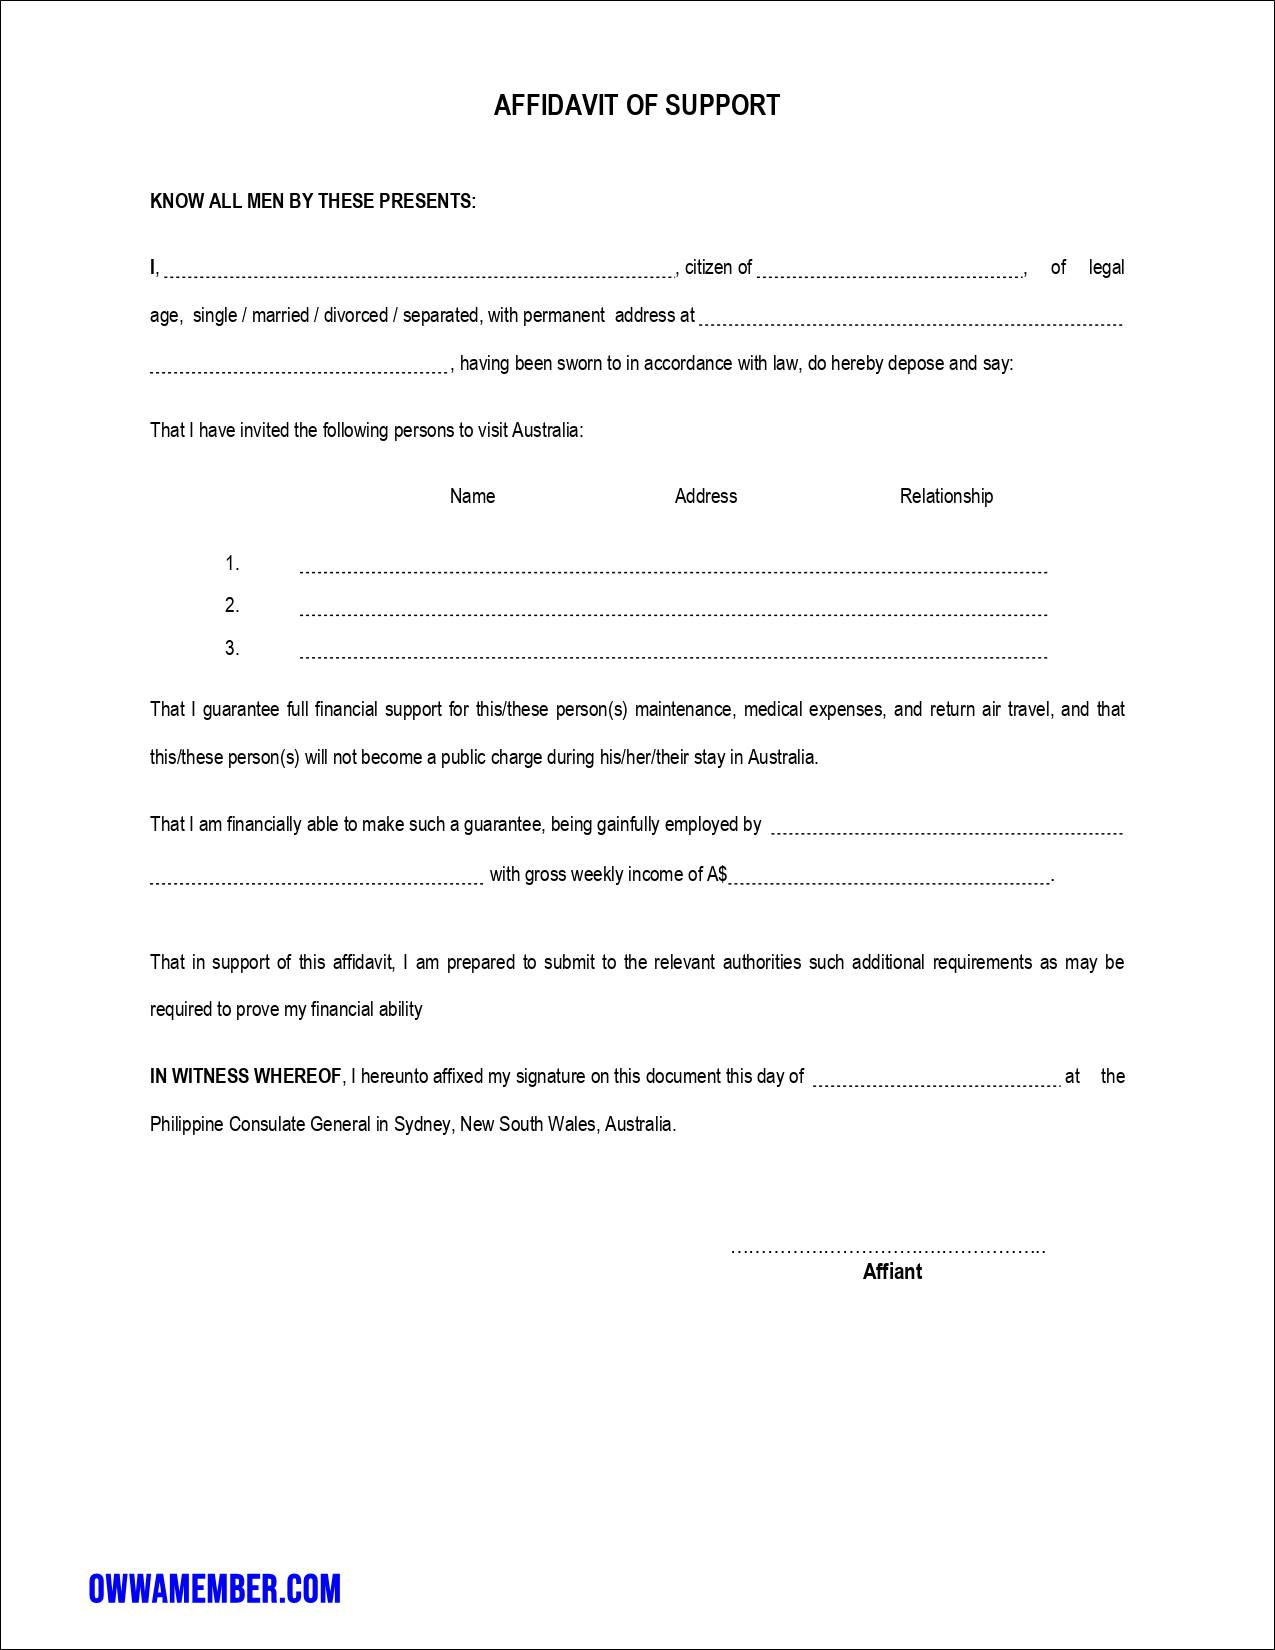 affidavit of support guarantee sydney australia template download_pages-to-jpg-0001